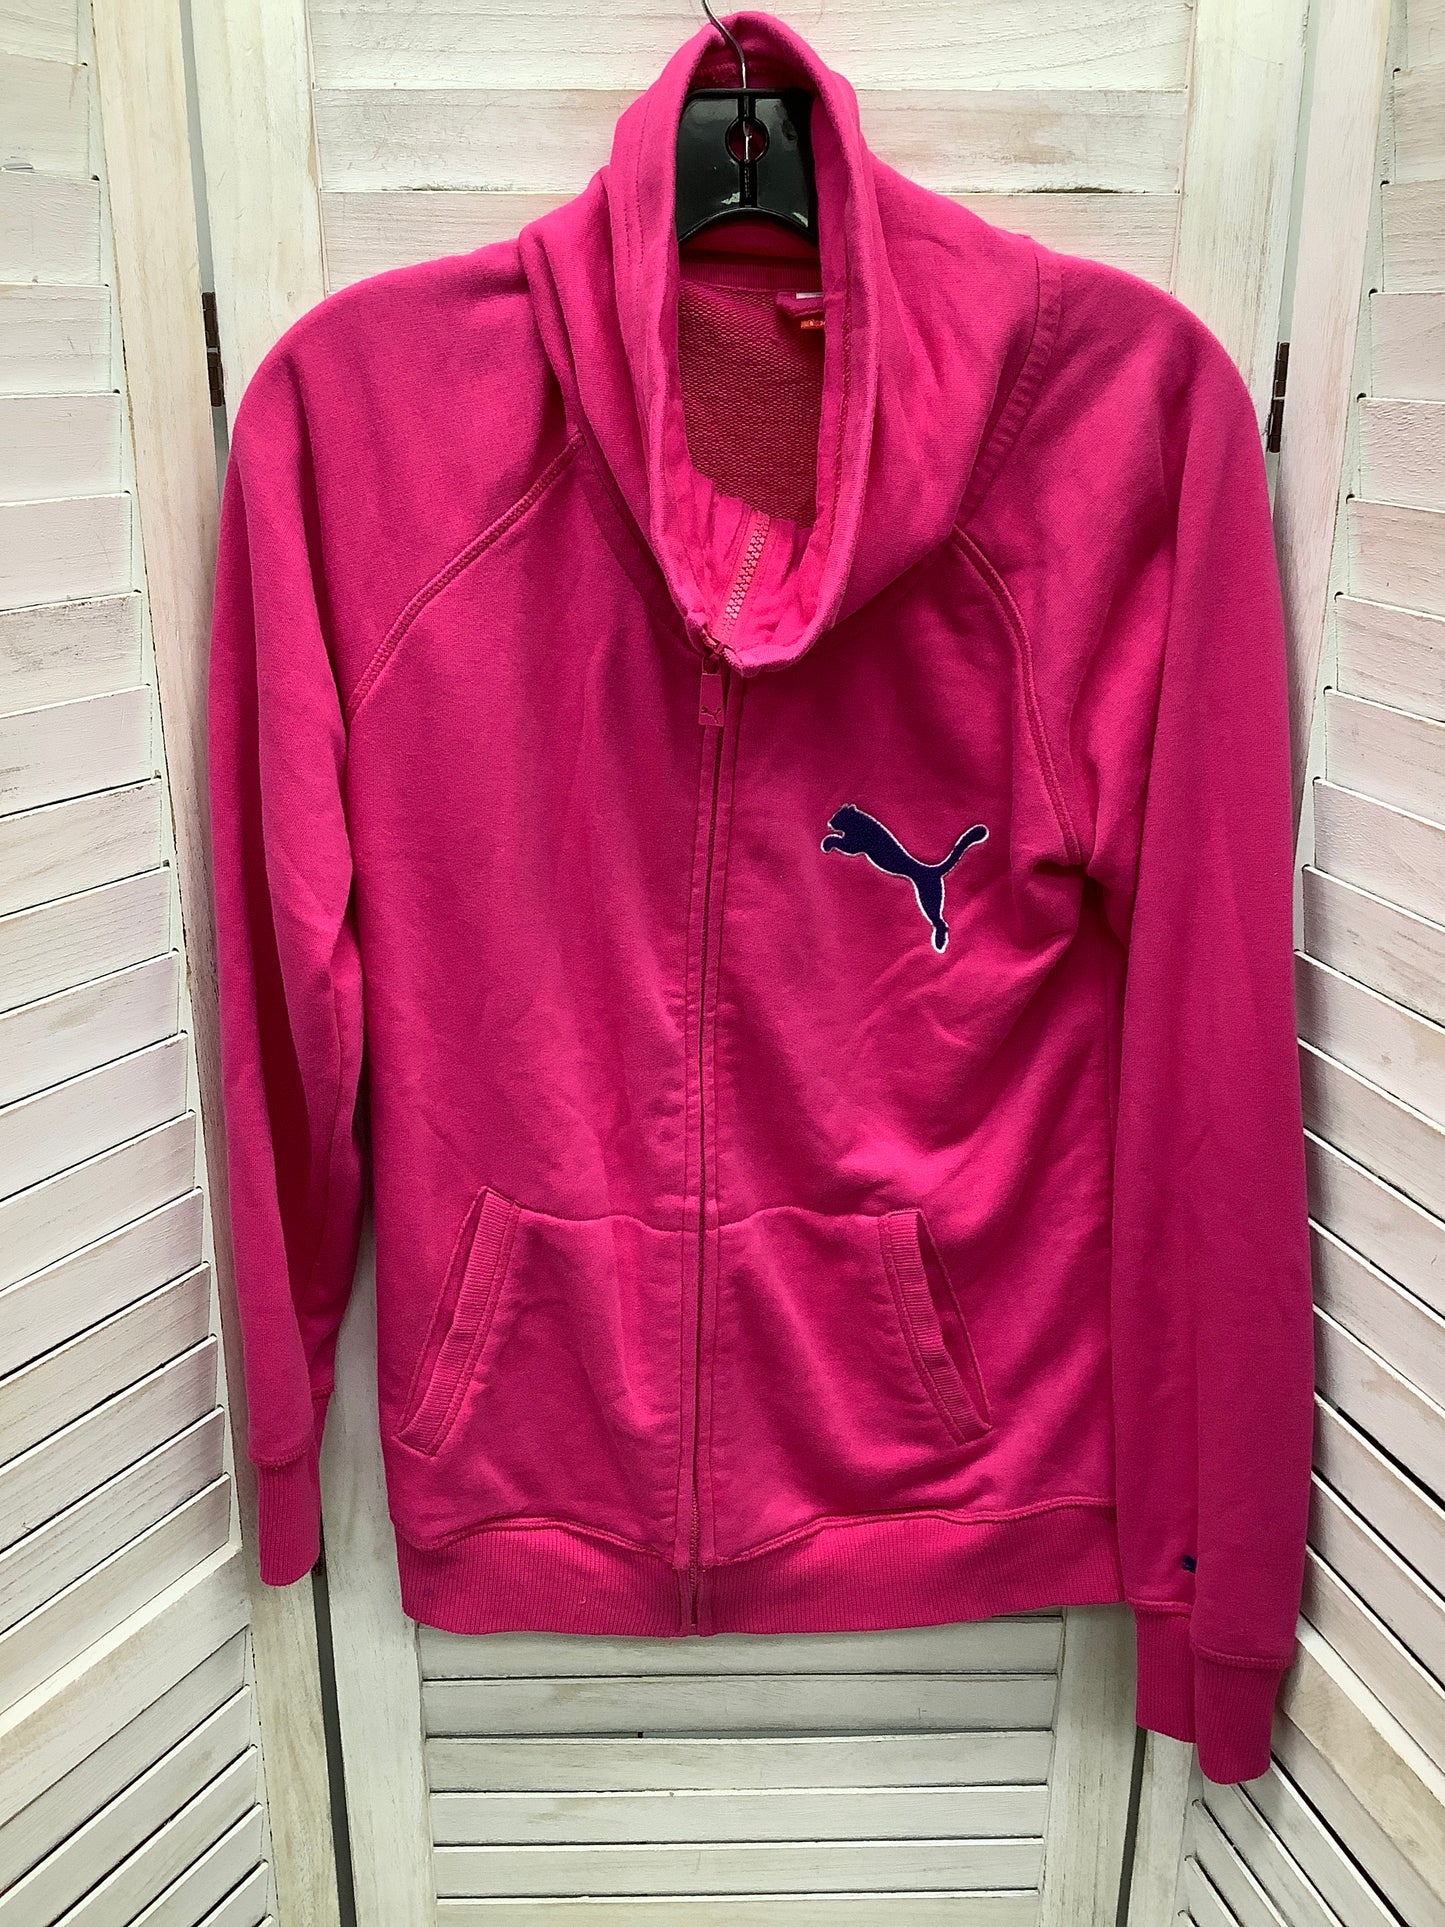 Jacket Other By Puma  Size: S